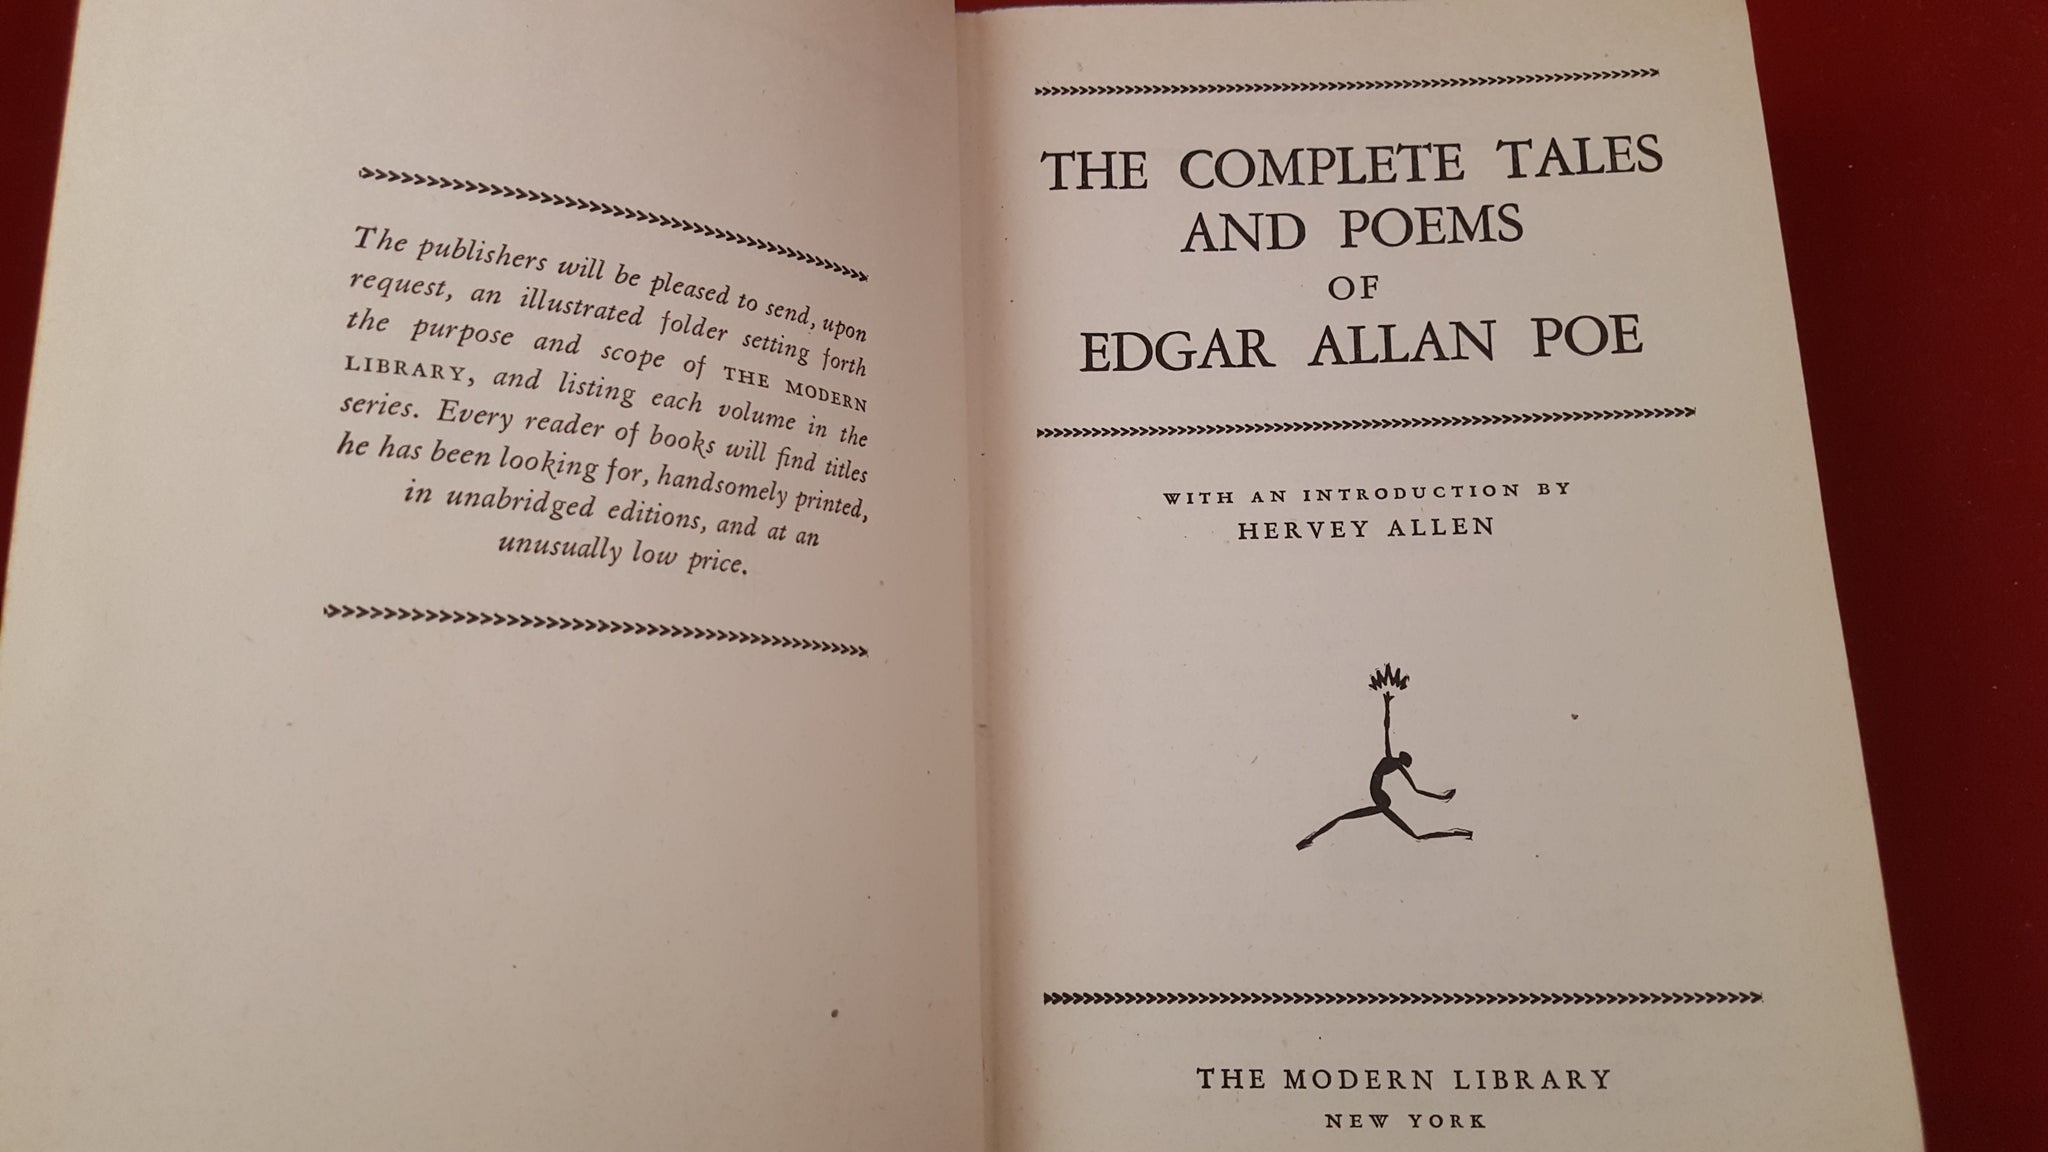 The Complete Tales & Poems of Edgar Allan Poe by Edgar Allan Poe, Quarto  At A Glance